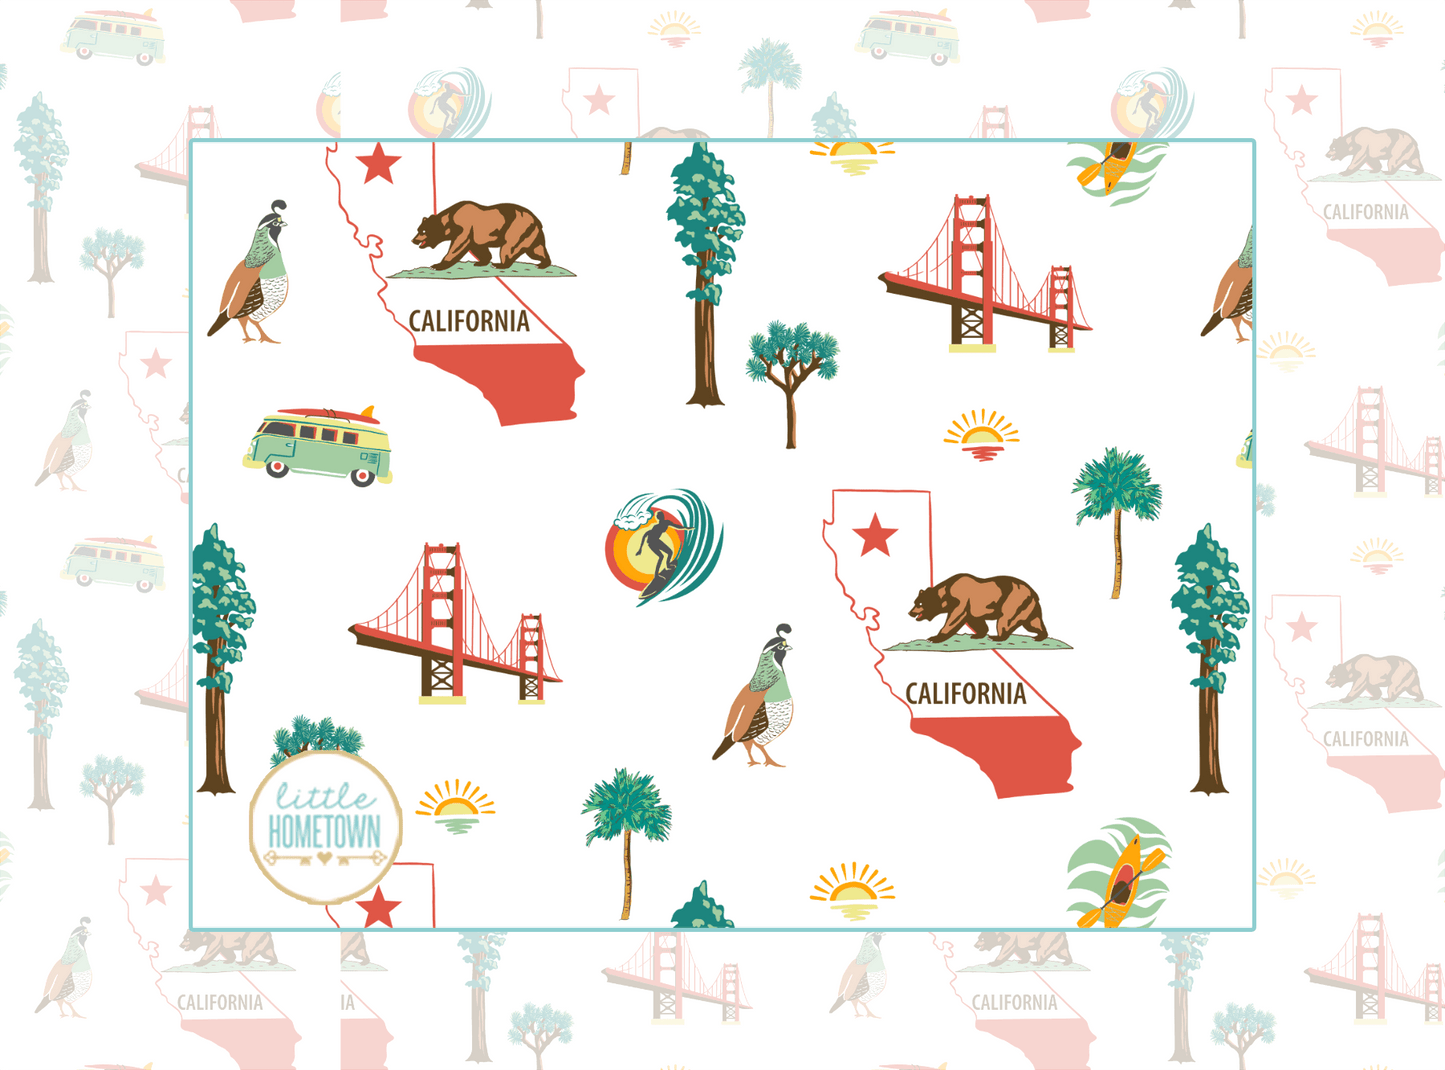 Colorful California-themed plush throw blanket featuring iconic landmarks and symbols, measuring 60x80 inches.